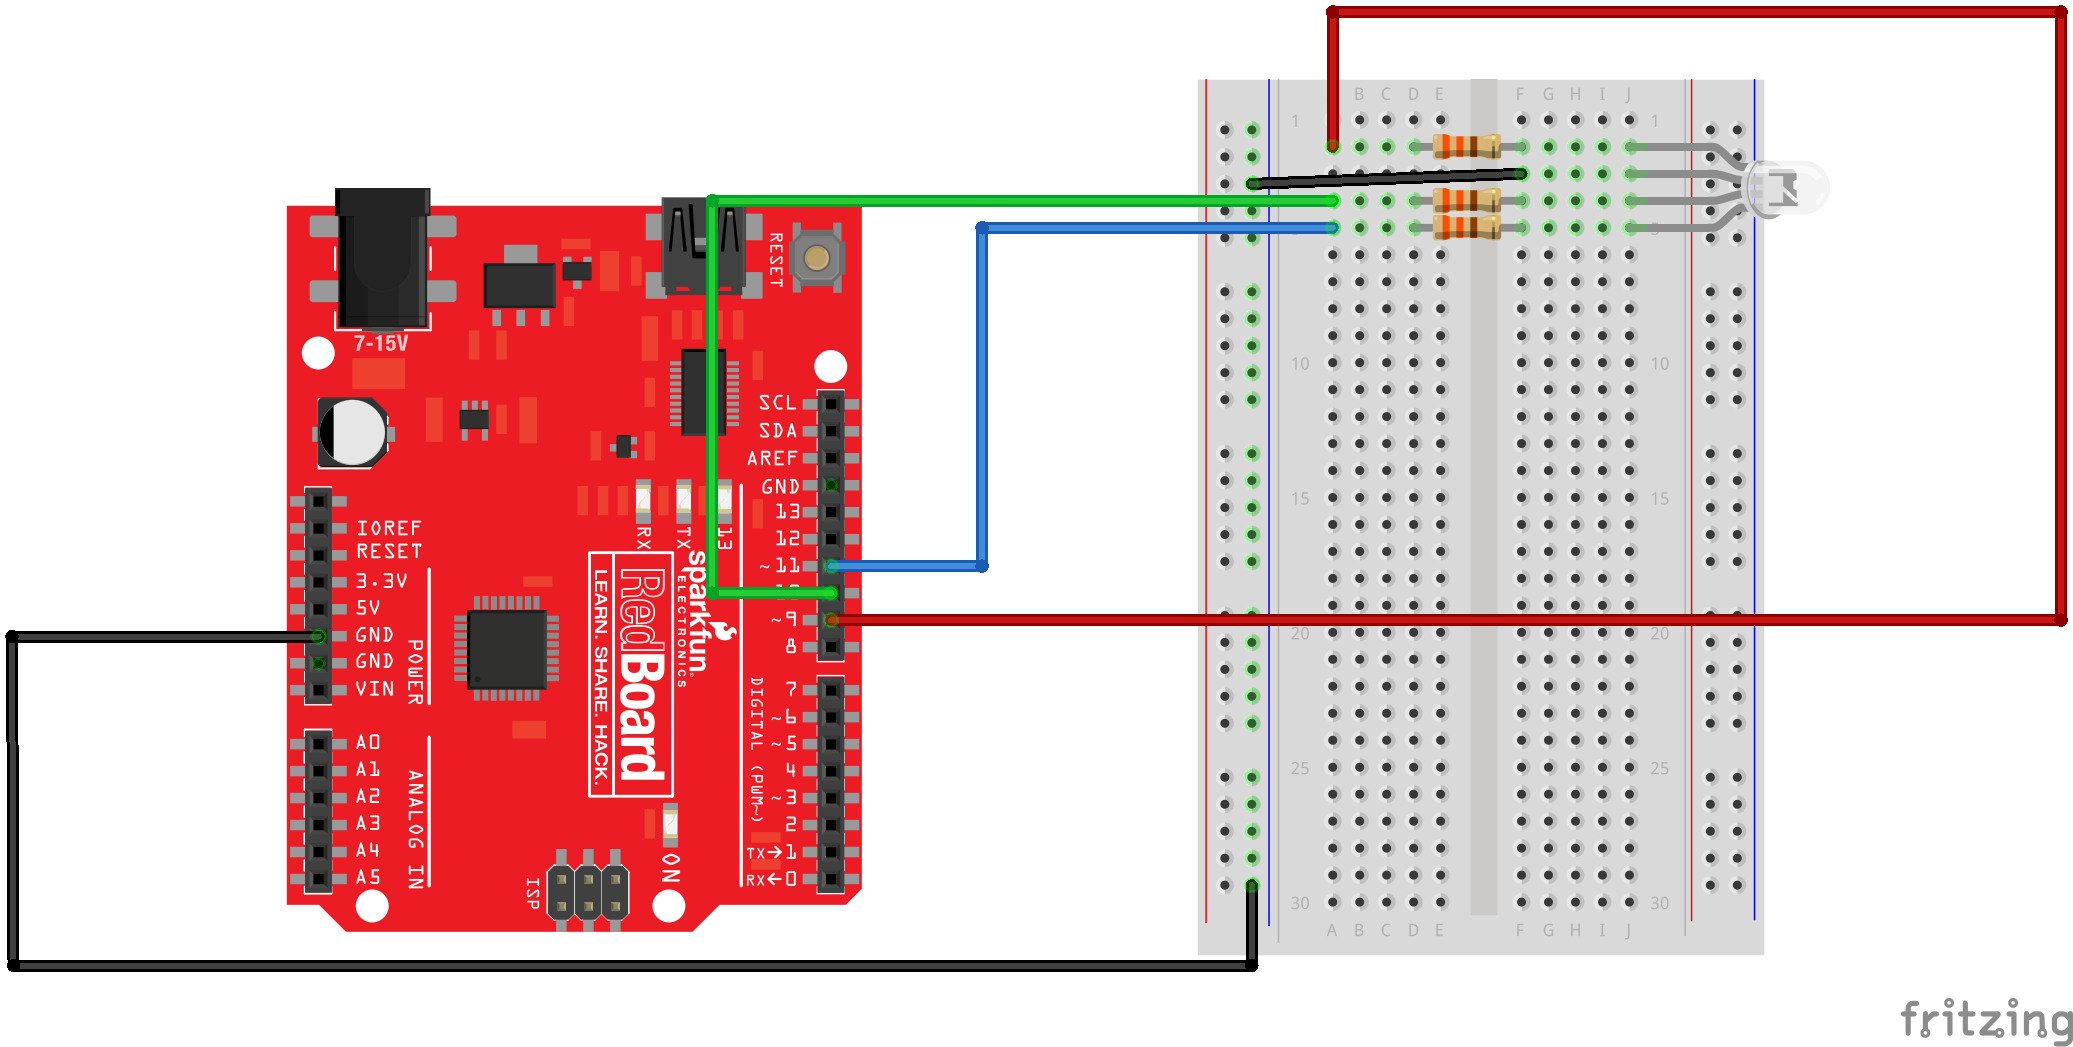 SIK Experiment Guide for Arduino - V3.2 - SparkFun Learn